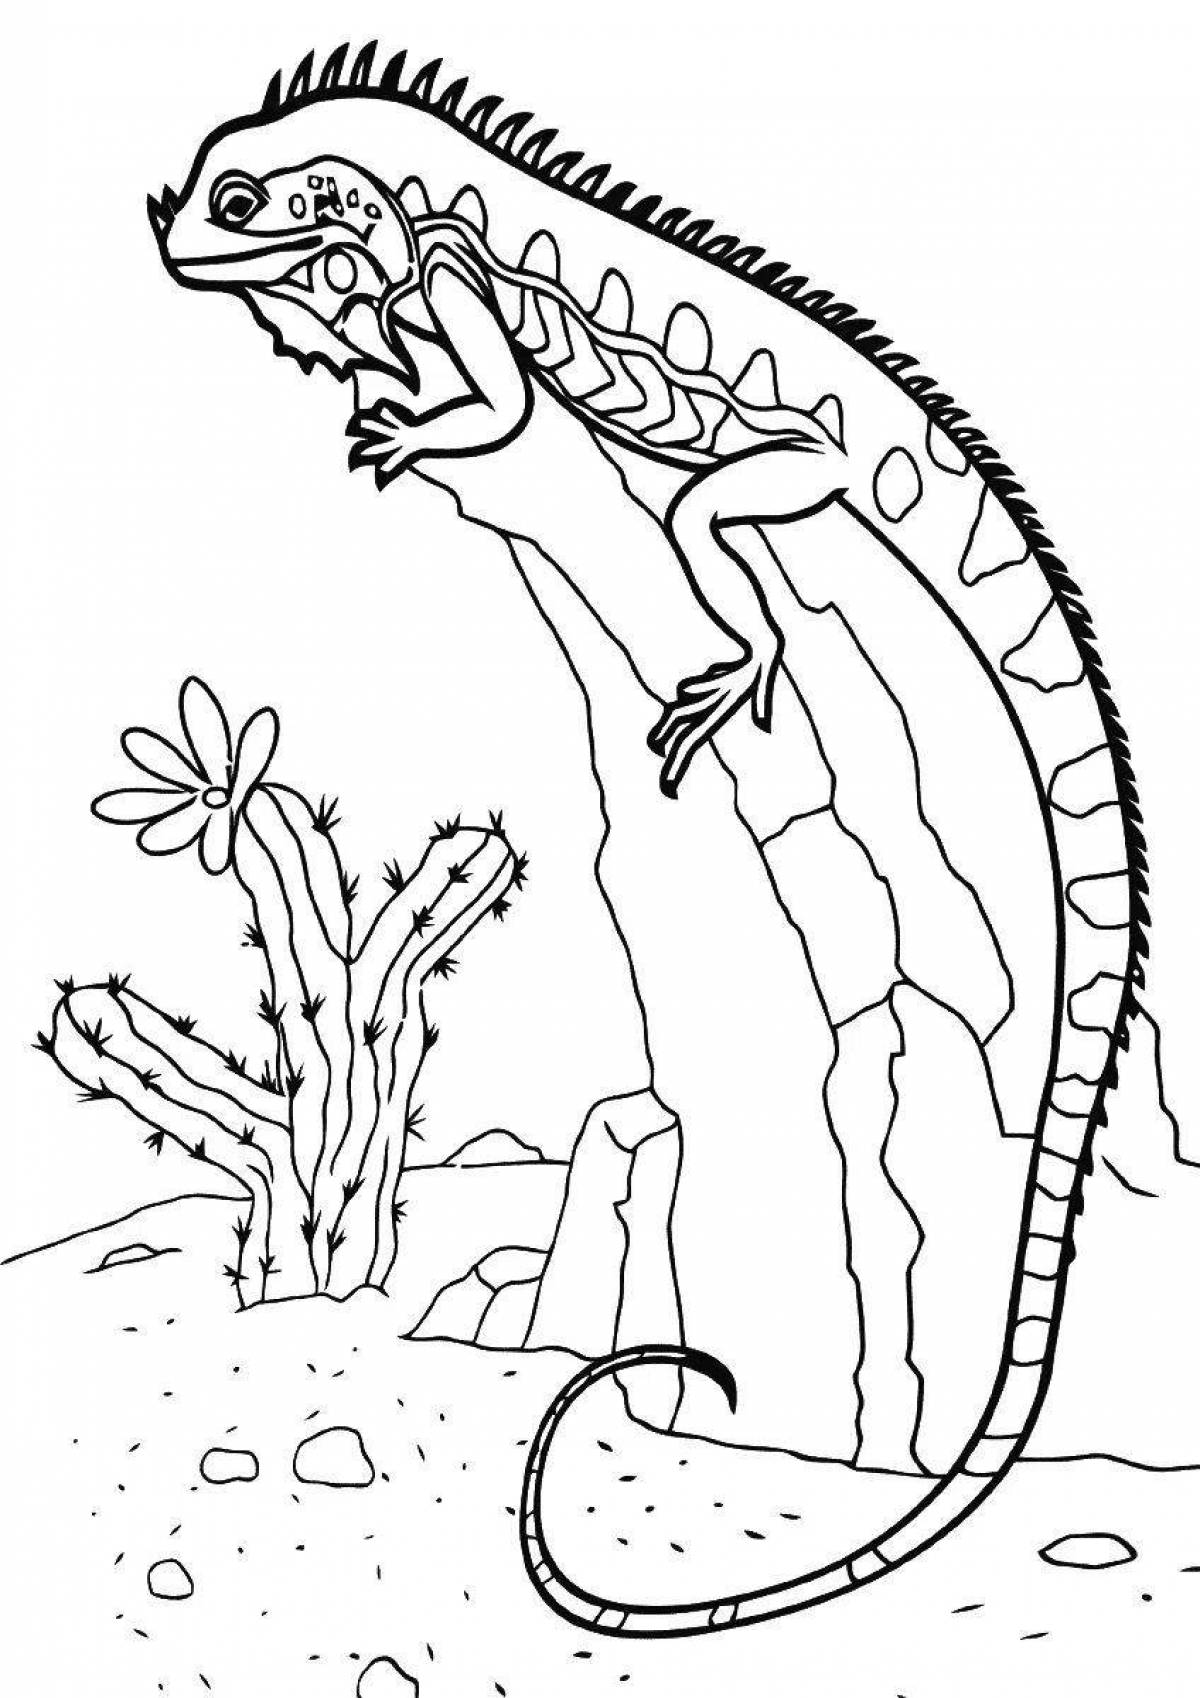 Animated monitor lizard coloring page